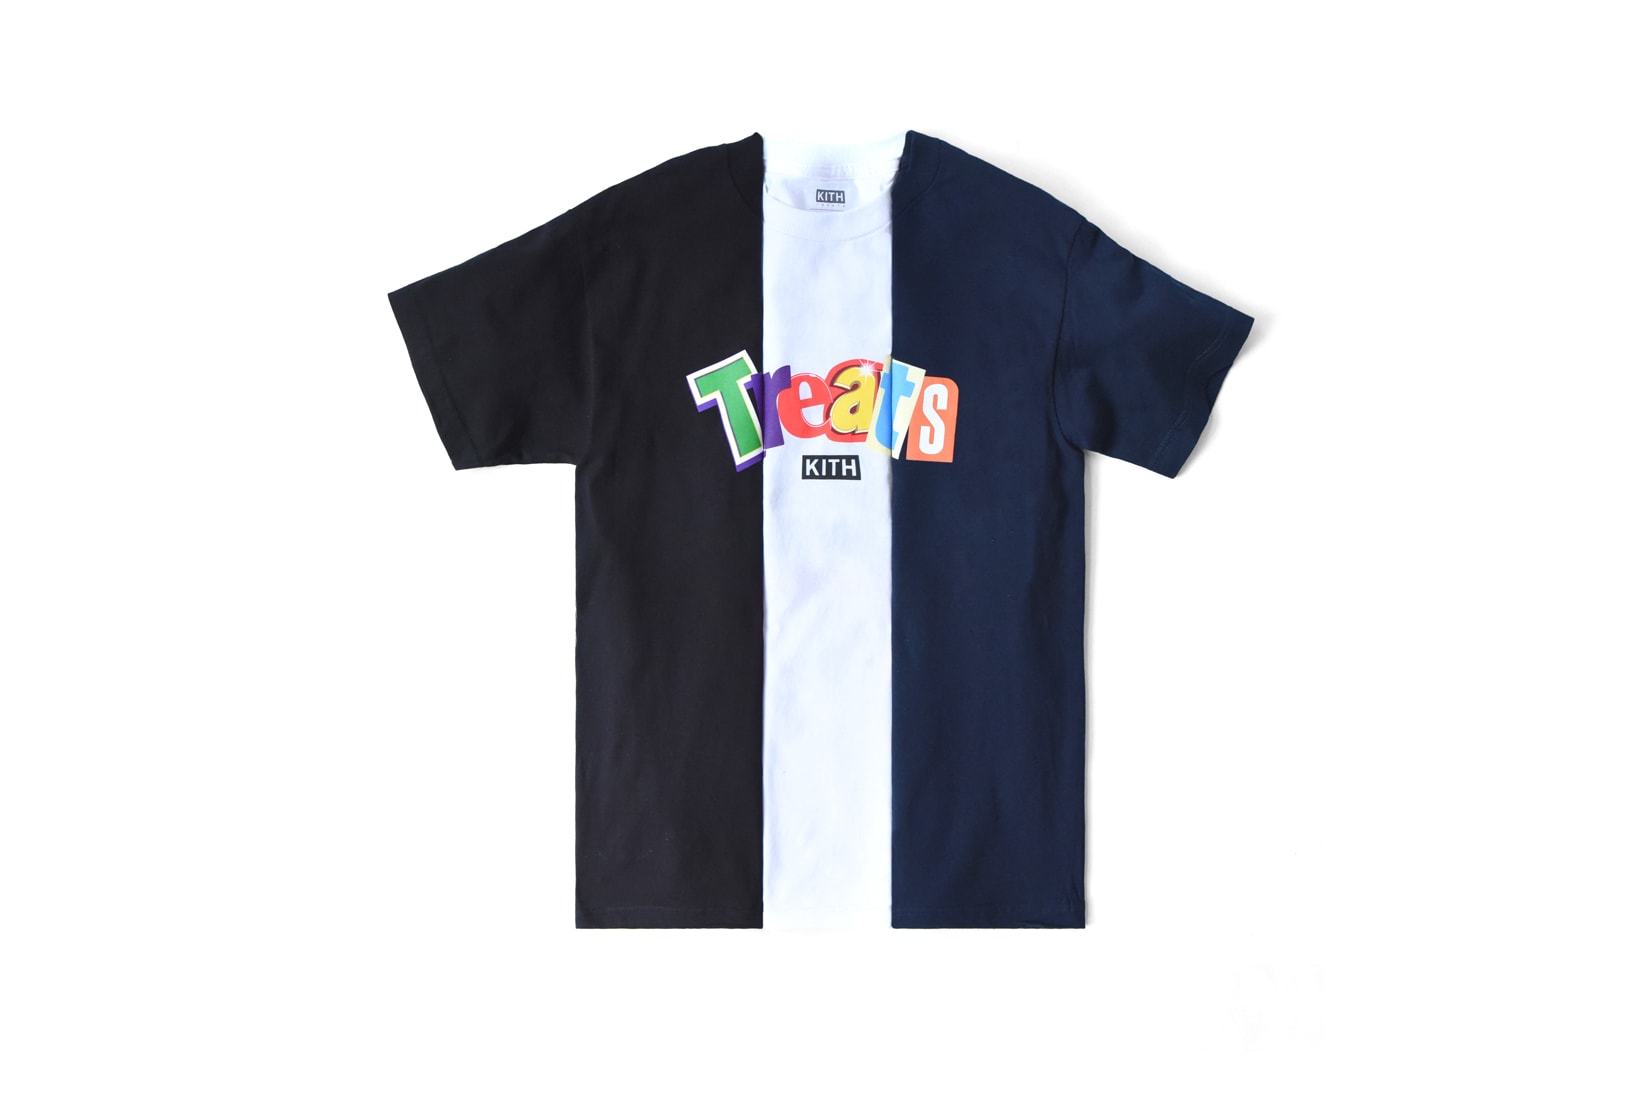 KITH Treats National Cereal Day 2019 Ransom Collection T-Shirt Multi-Colored Black White